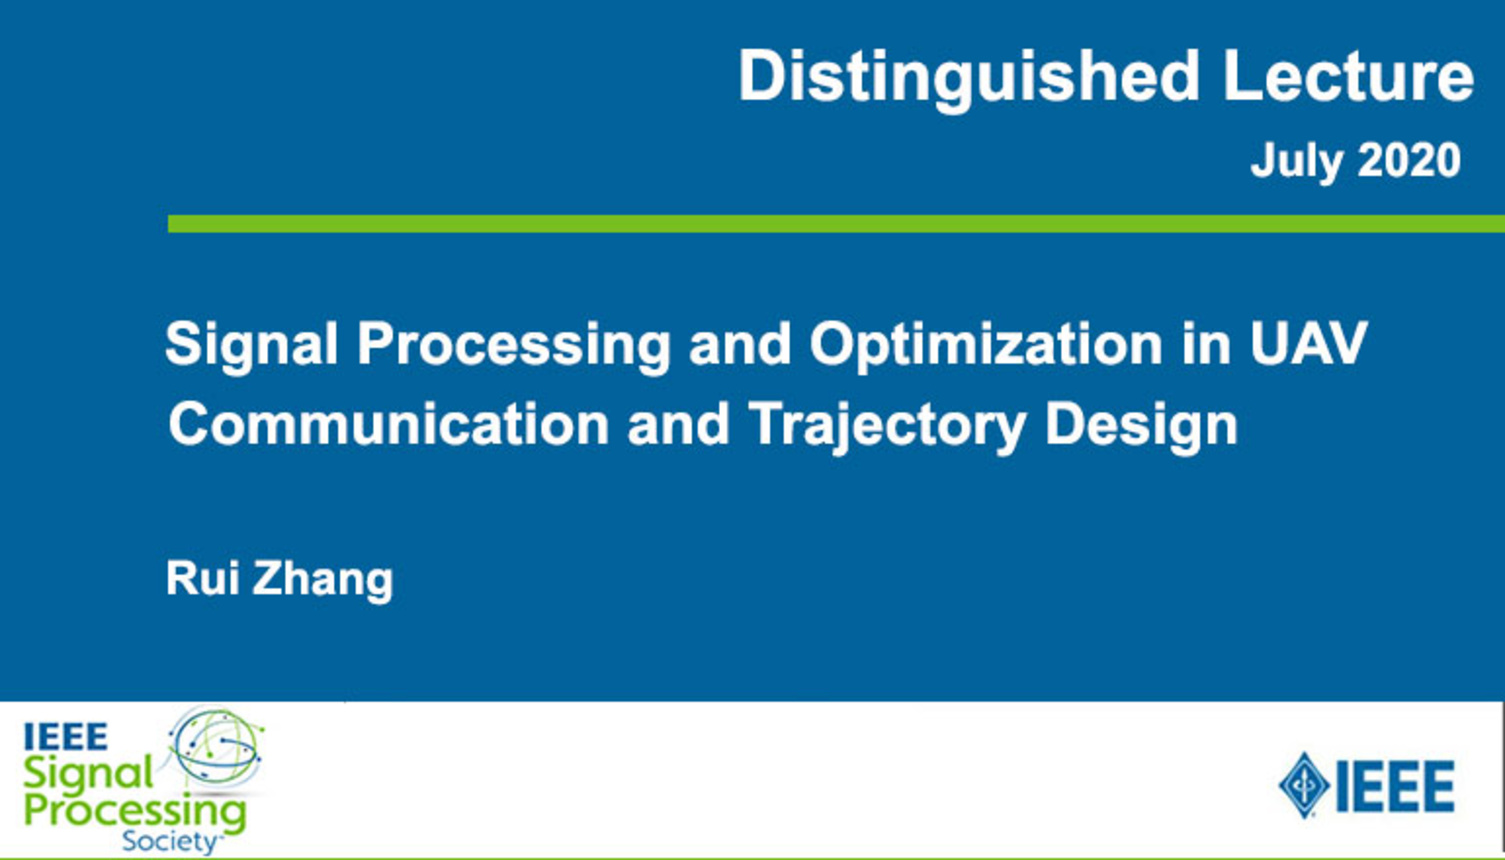 Signal Processing and Optimization in UAV Communication and Trajectory Design